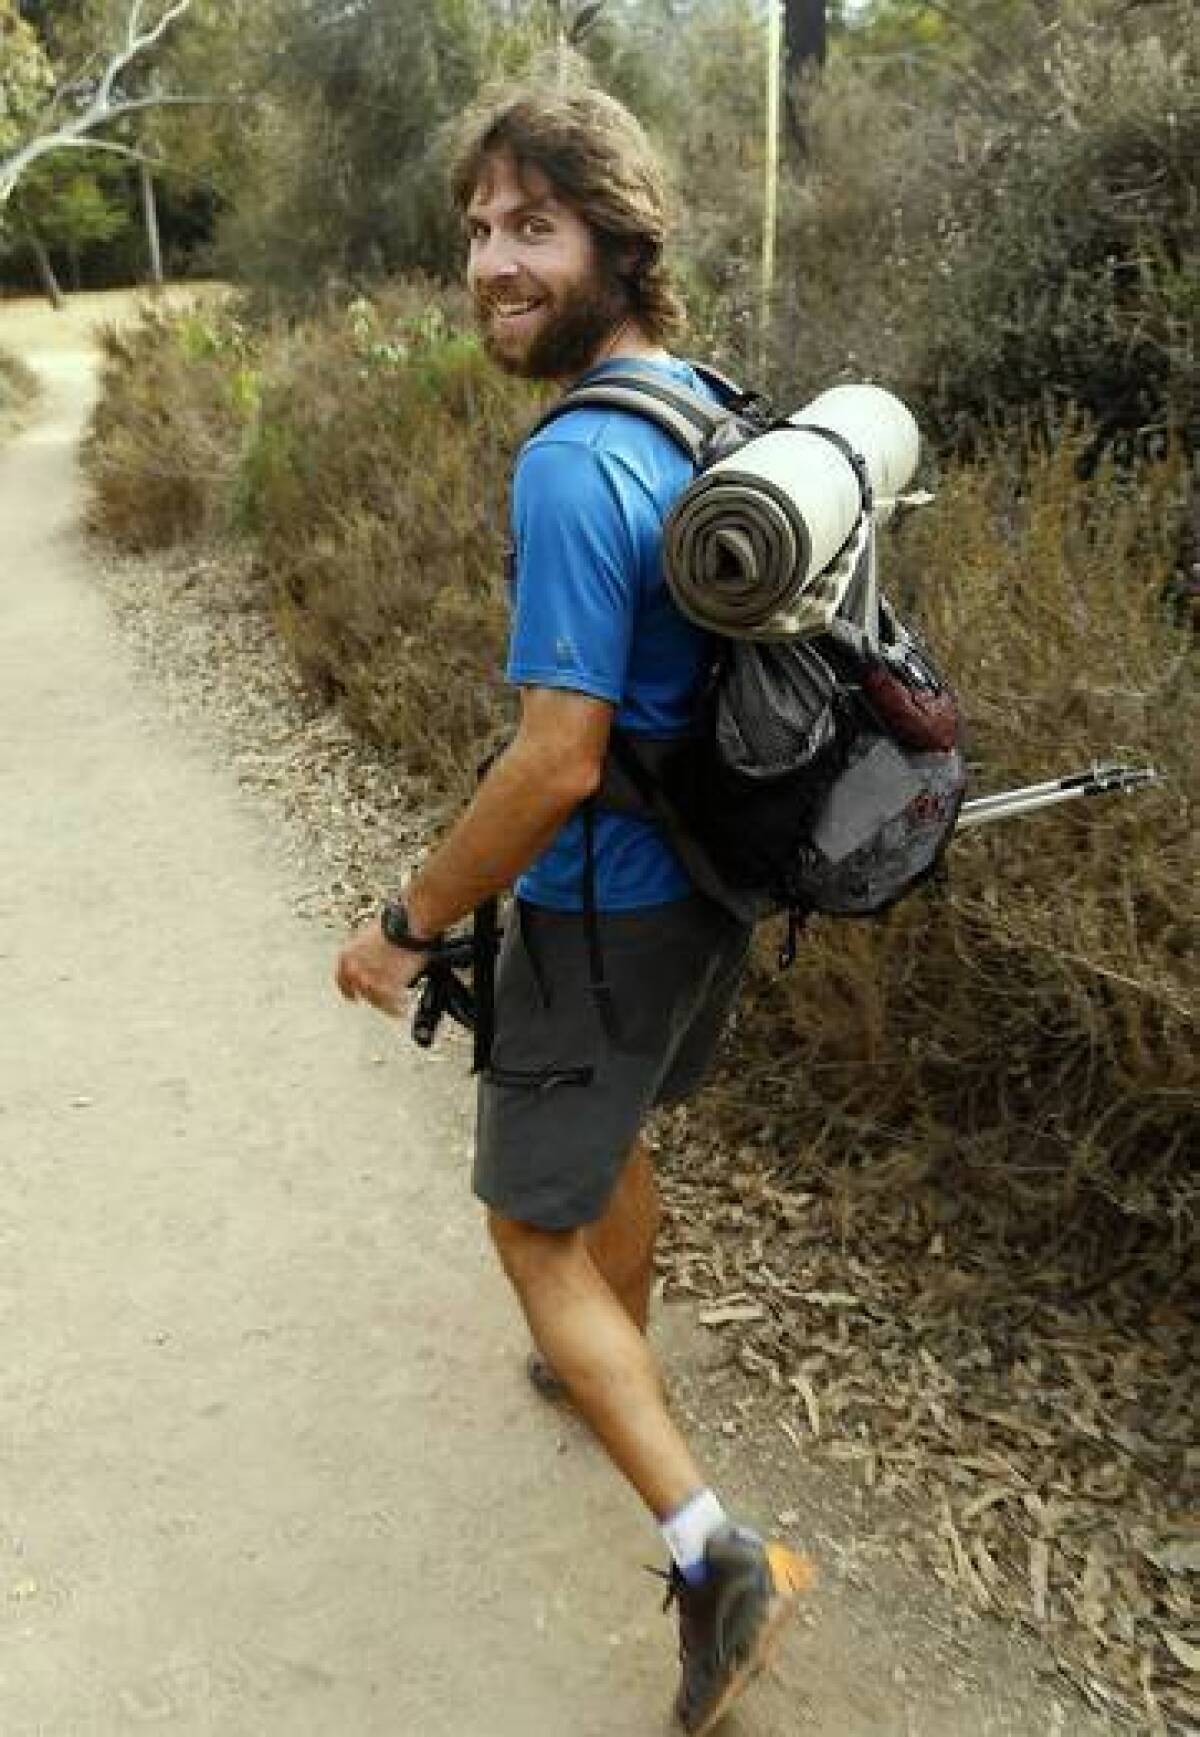 Joshua Garrett hiked the famed Pacific Crest Trail in what is believed to be a record 59 days and 8 hours.